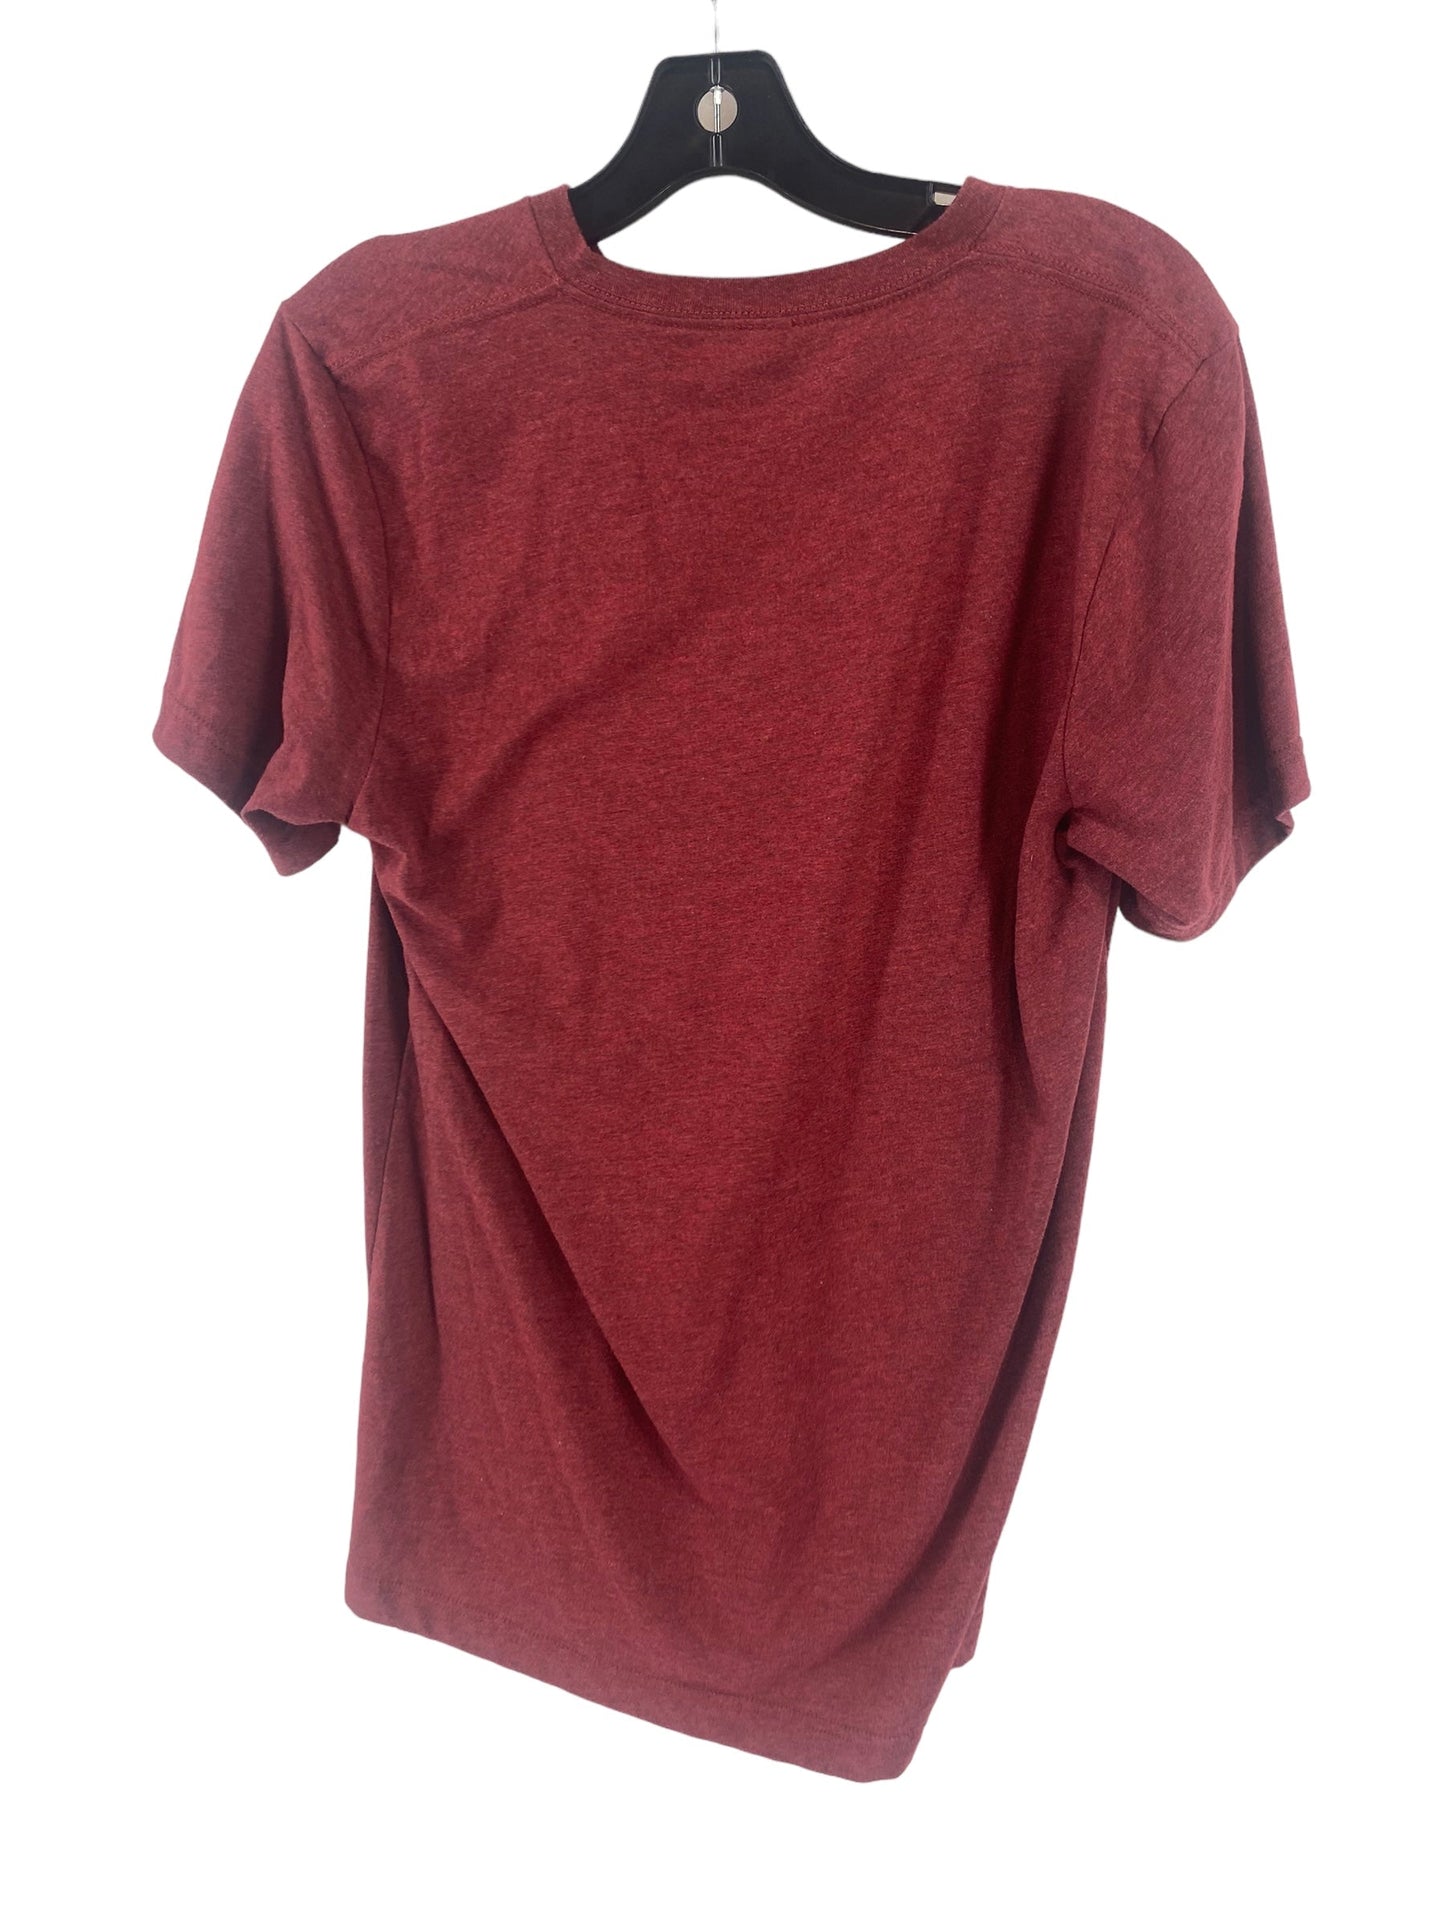 Red Top Short Sleeve Basic Bella + Canvas, Size M